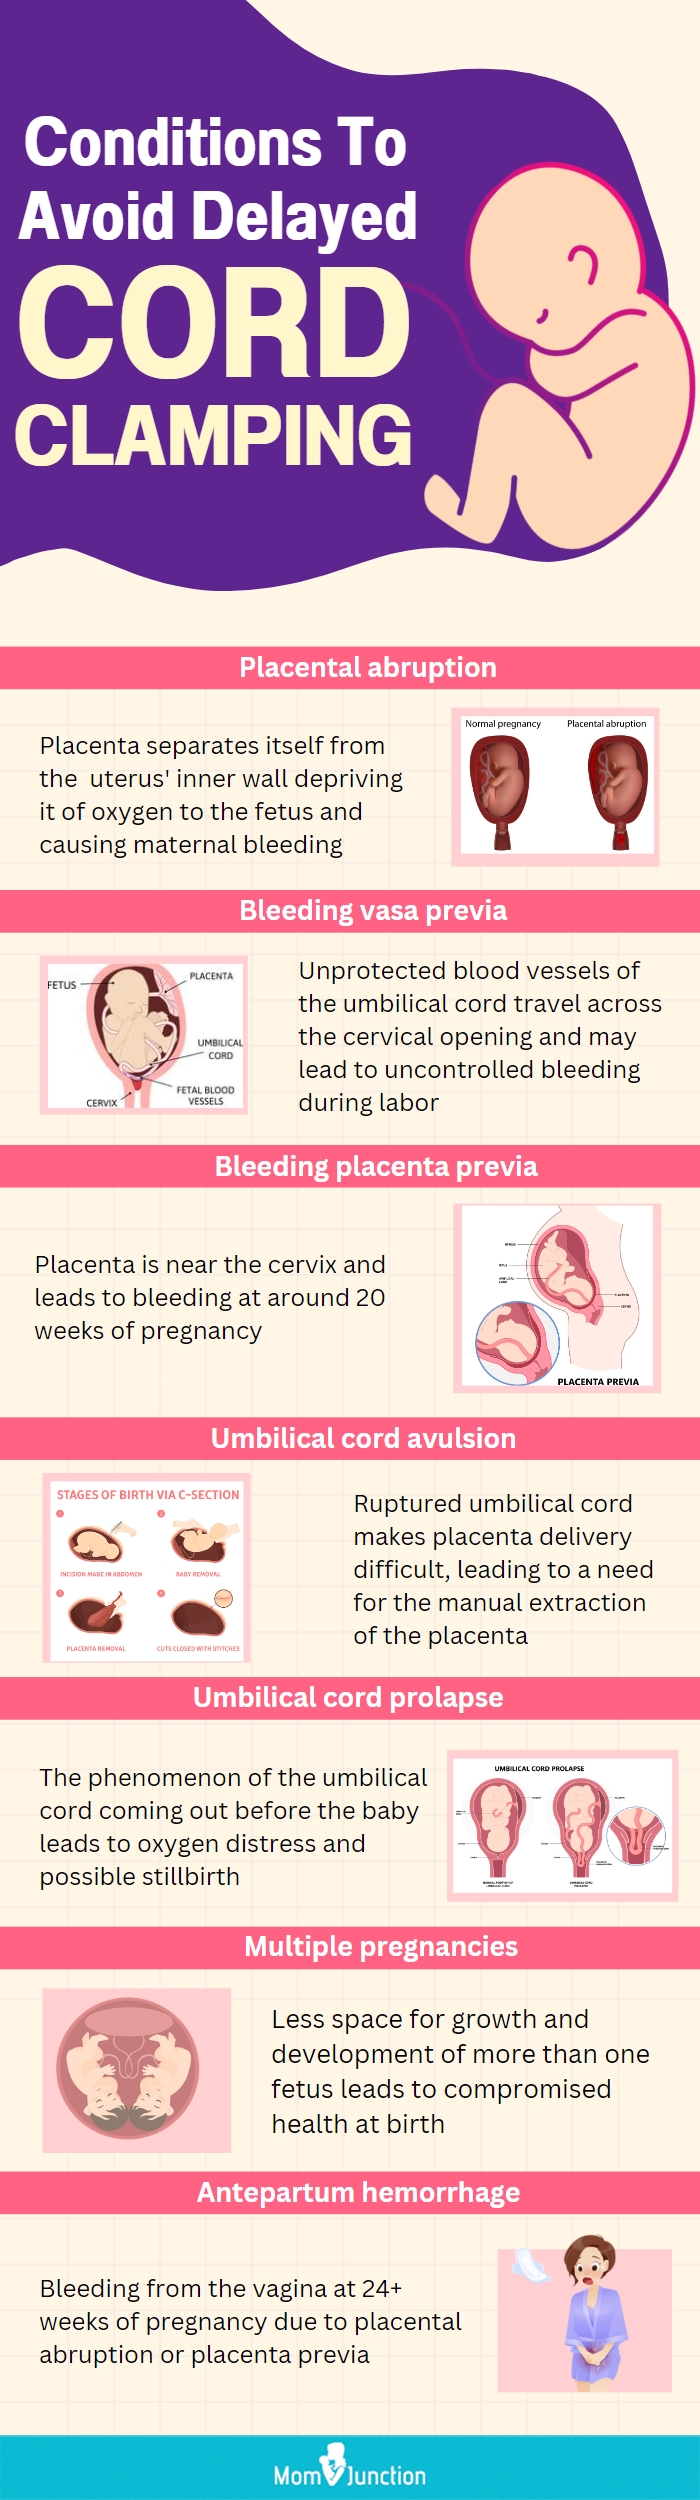 conditions to avoid delayed cord clamping (infographic)